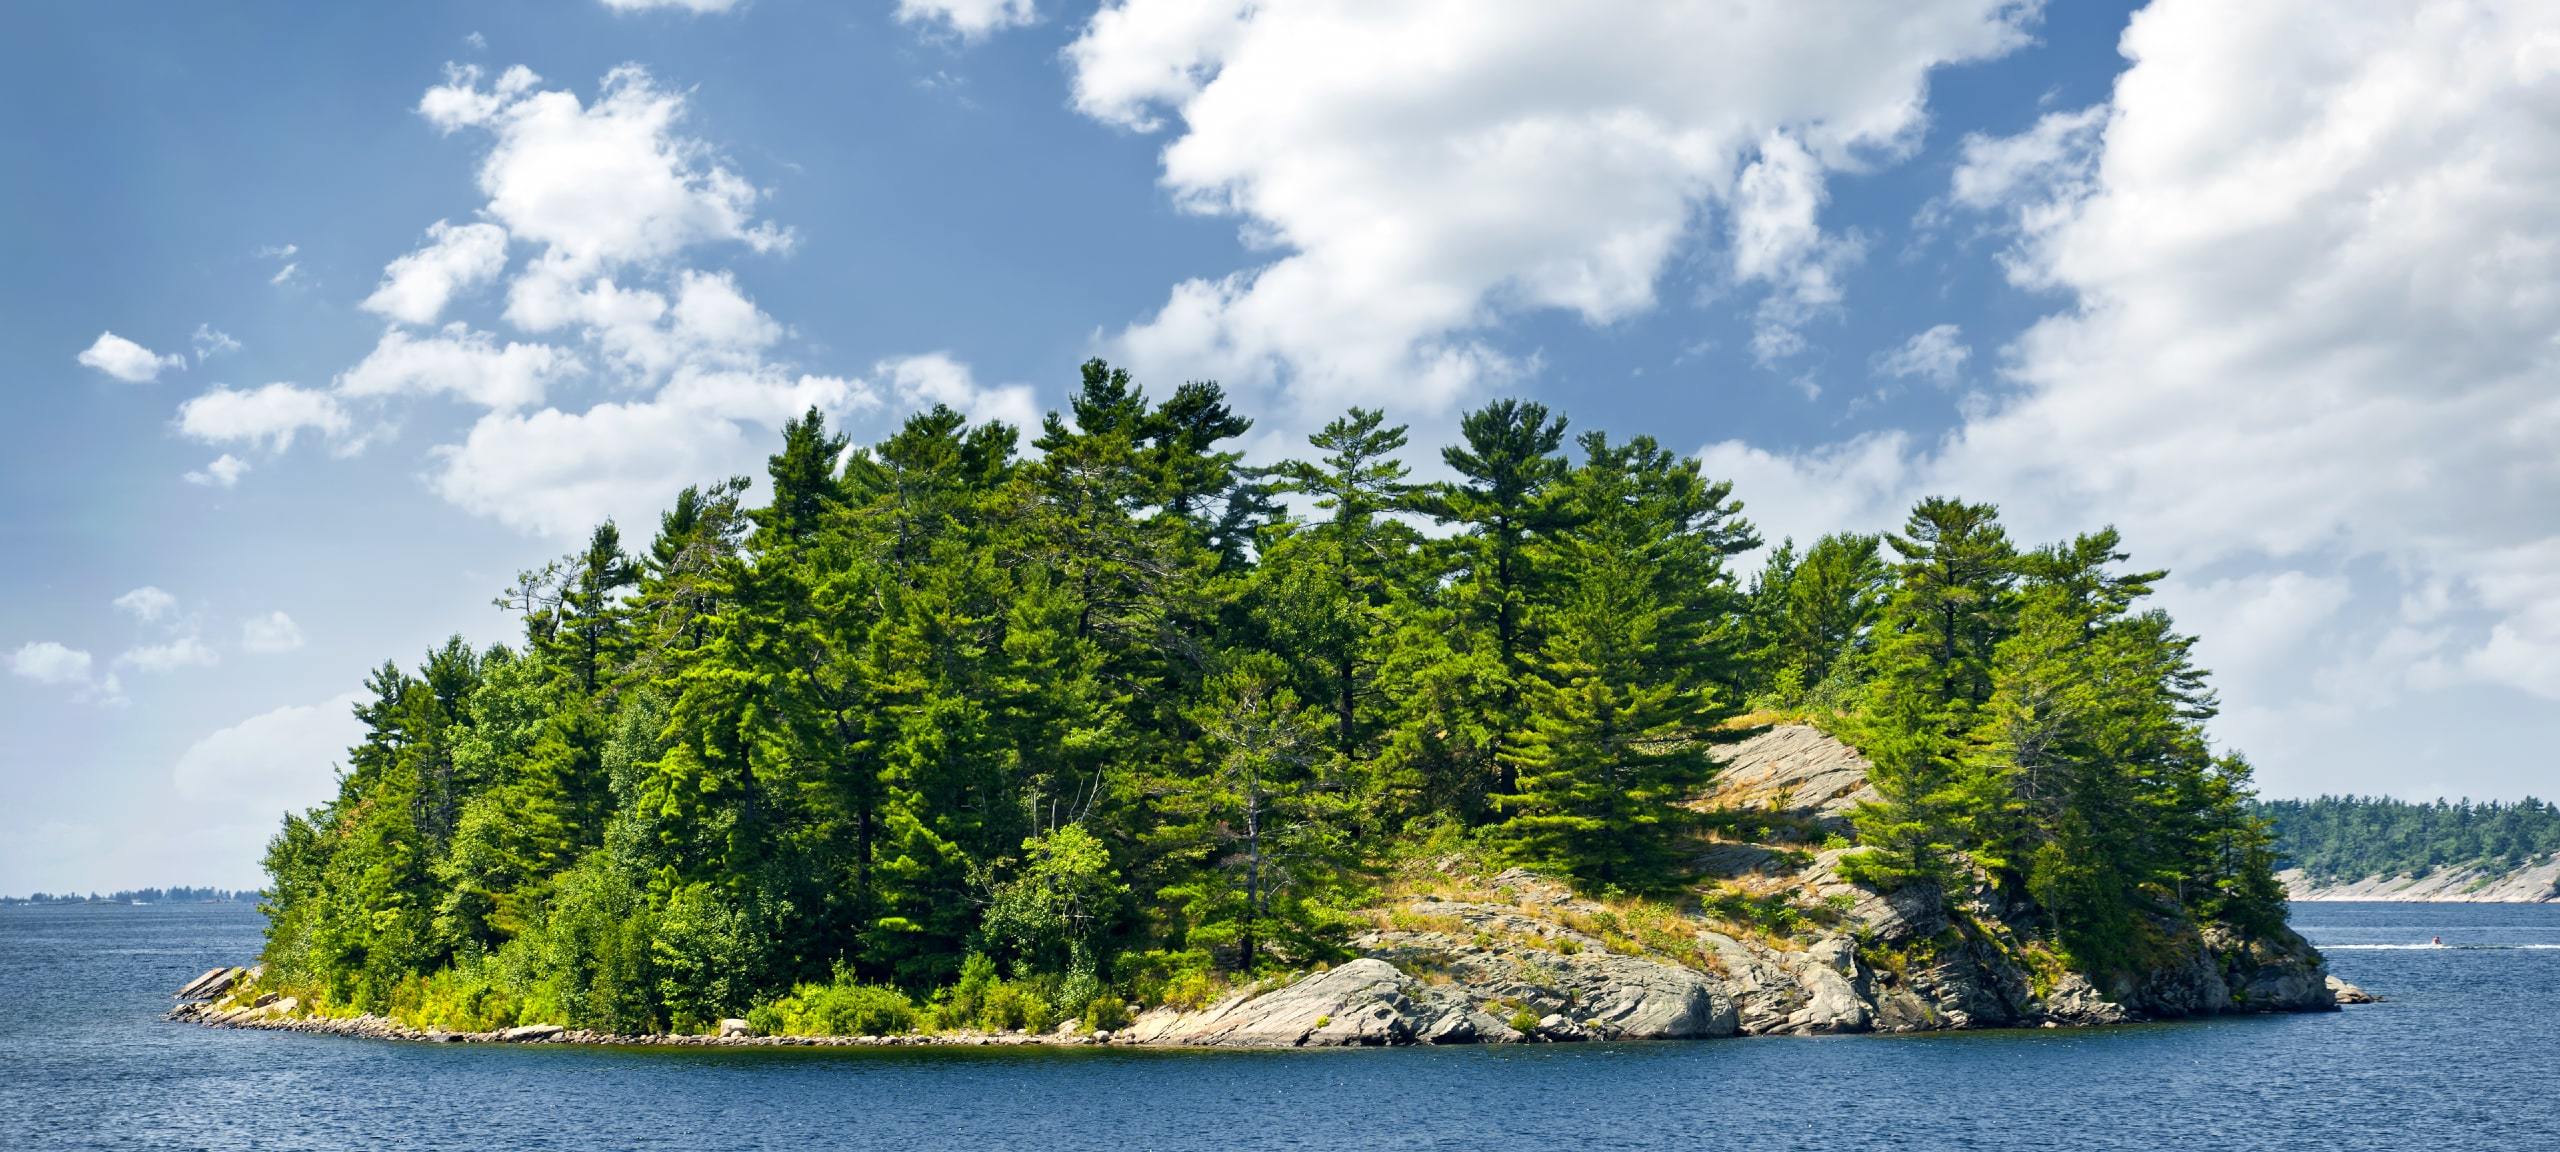 Small island with trees in Georgian Bay near Parry Sound, ON